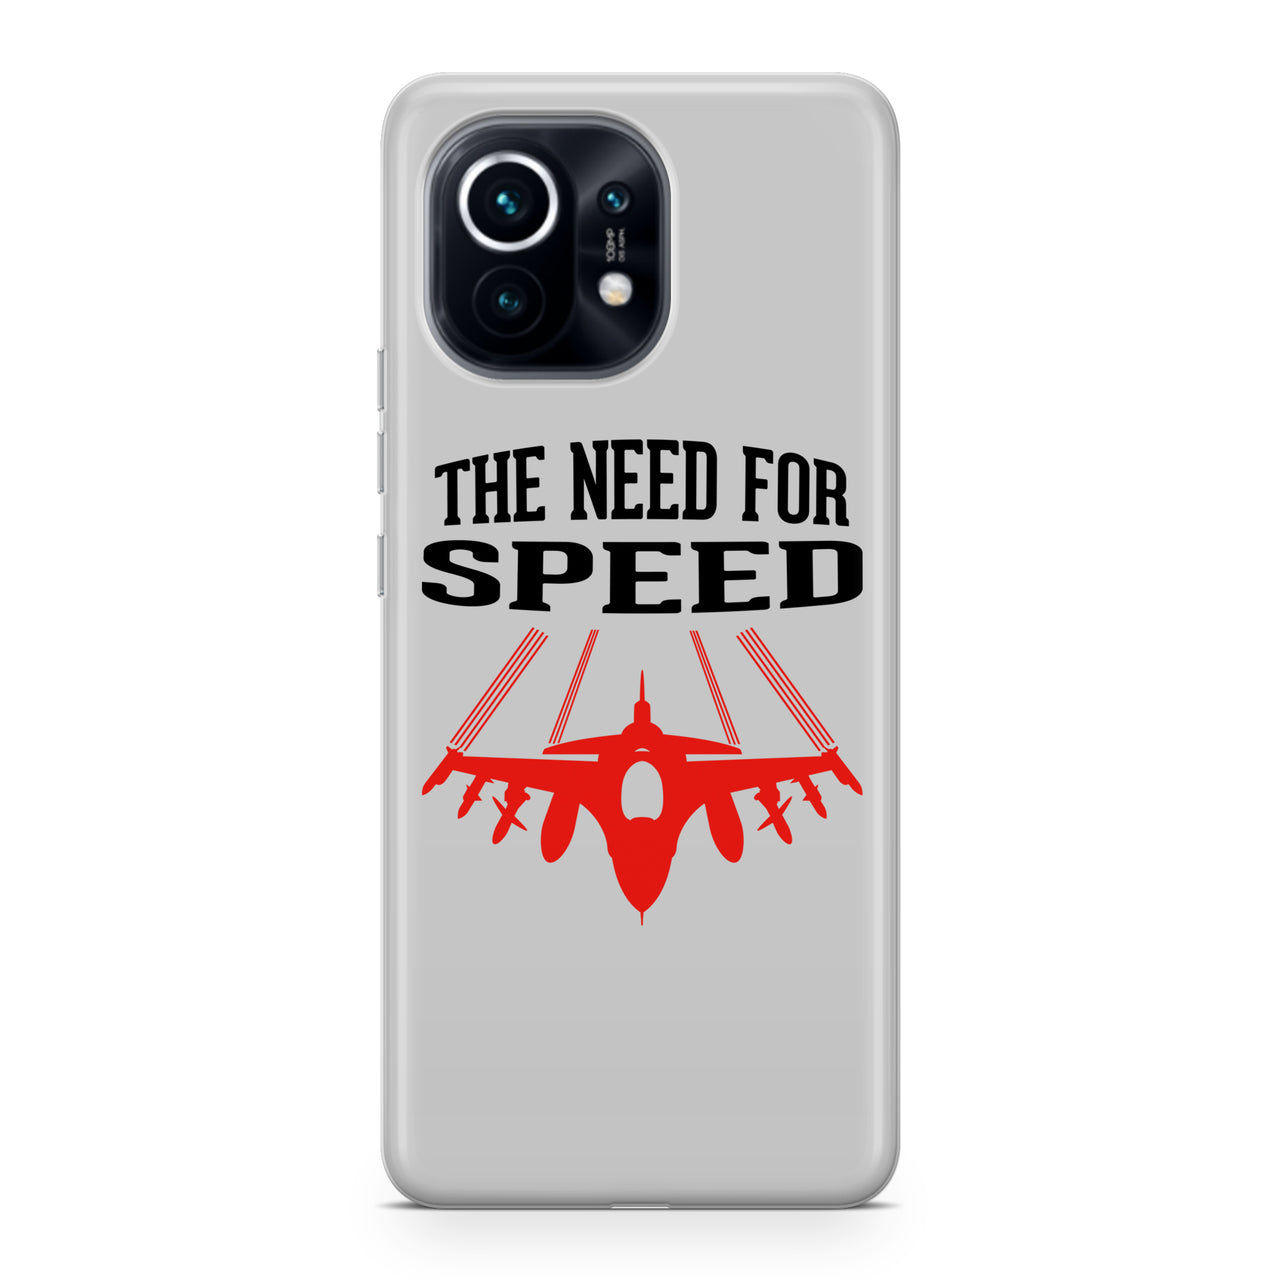 The Need For Speed Designed Xiaomi Cases